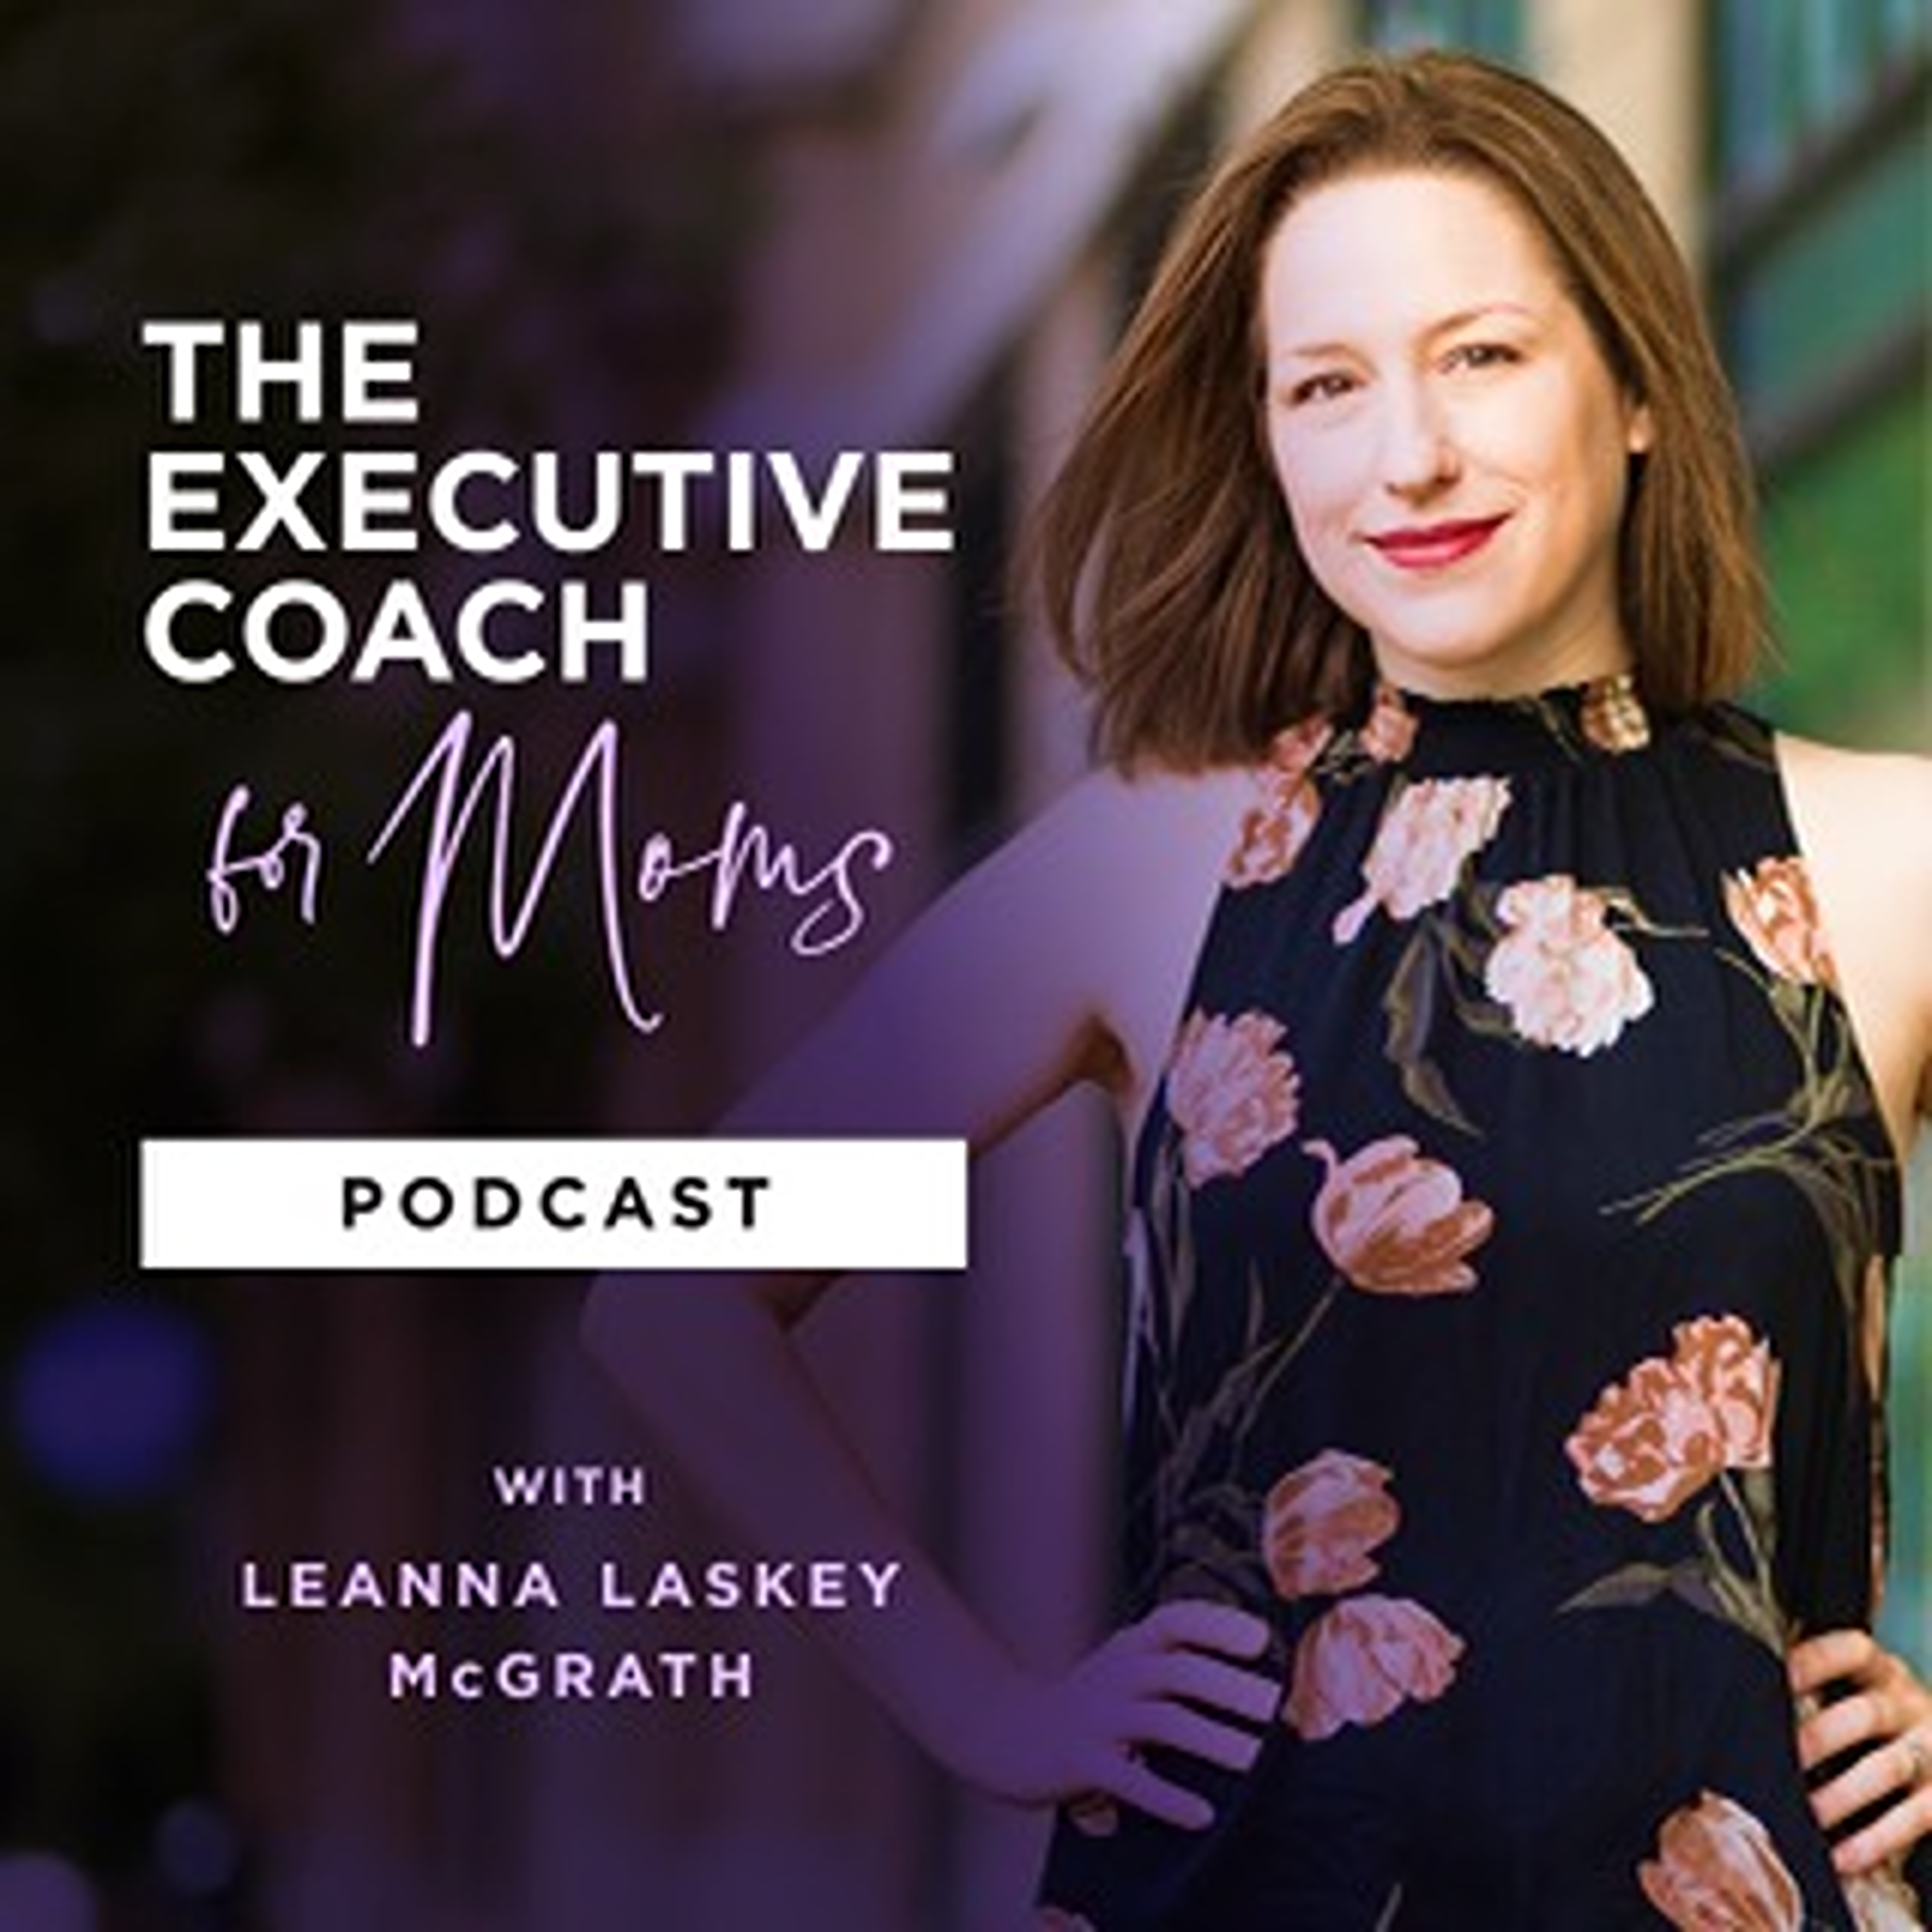 The Executive Coach for Moms Podcast